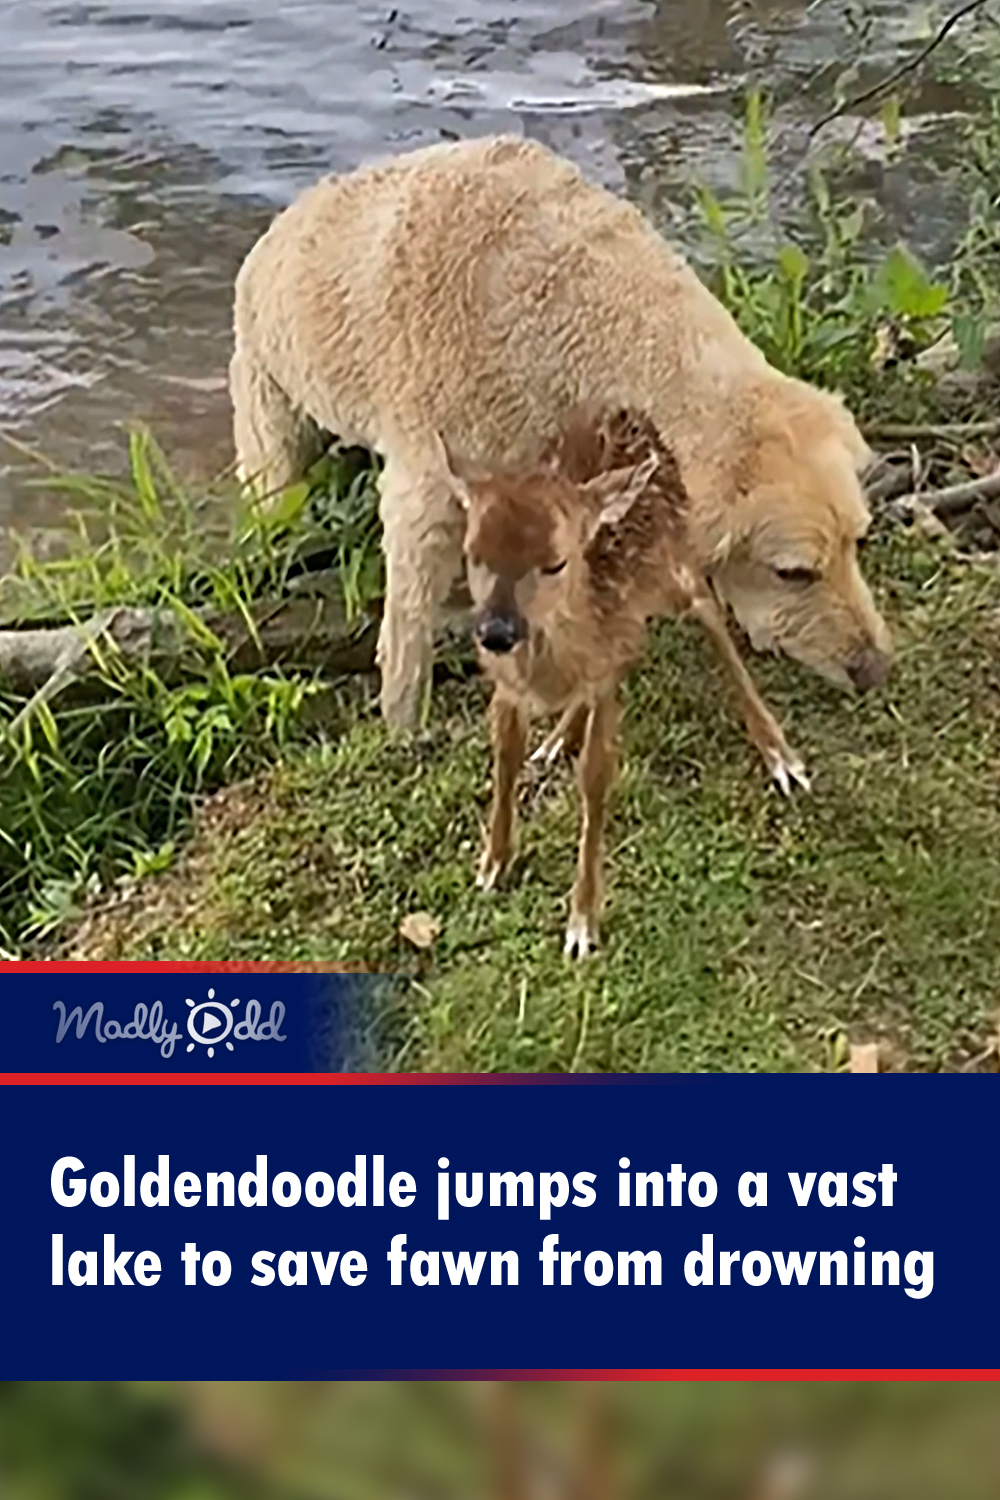 Goldendoodle jumps into a vast lake to save fawn from drowning